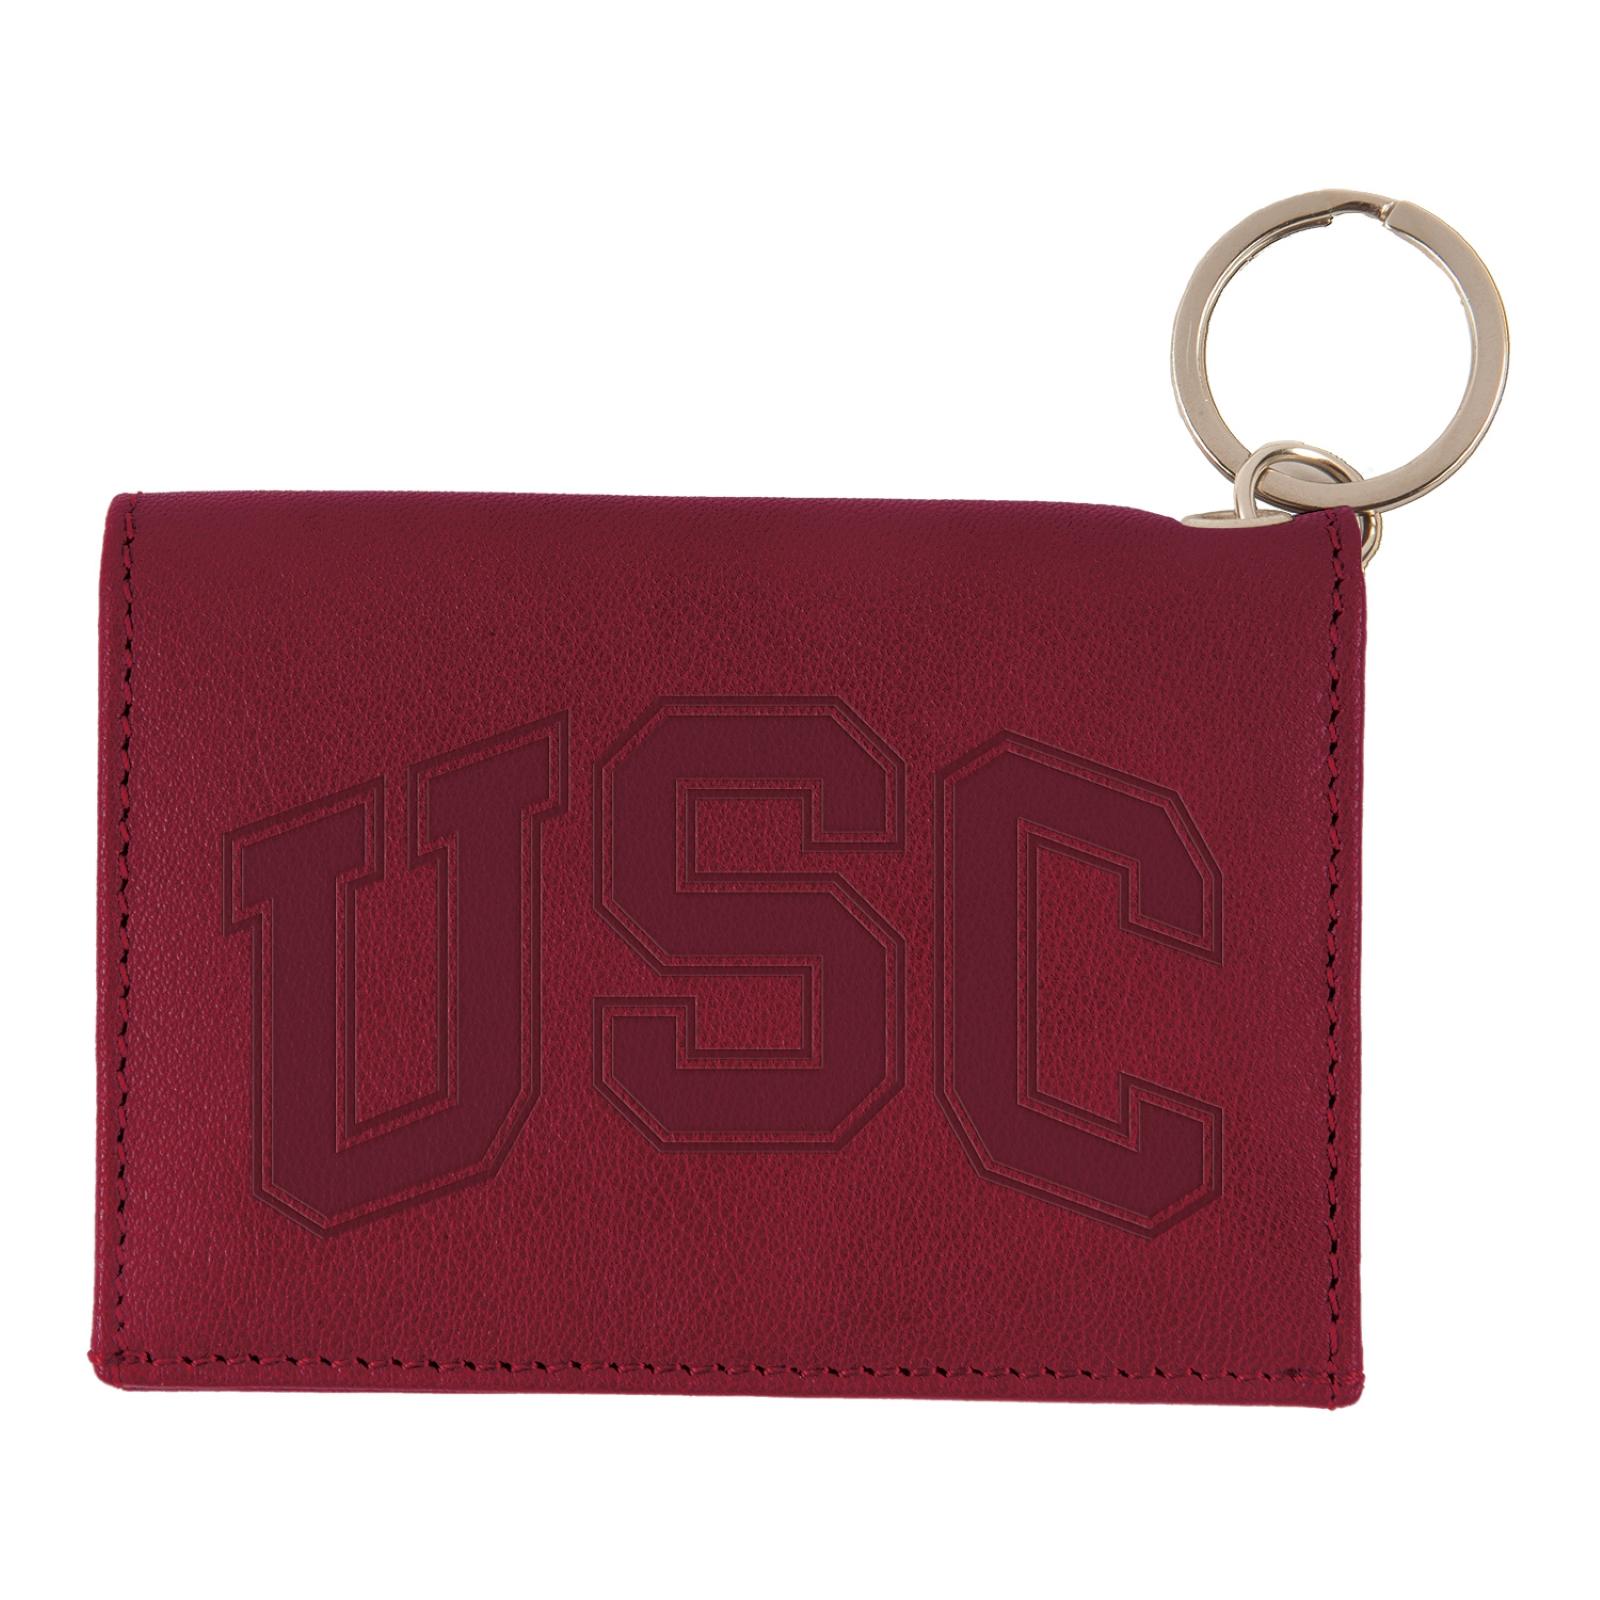 USC Arch Leather Snap ID Holder Cardinal by Jardine image01